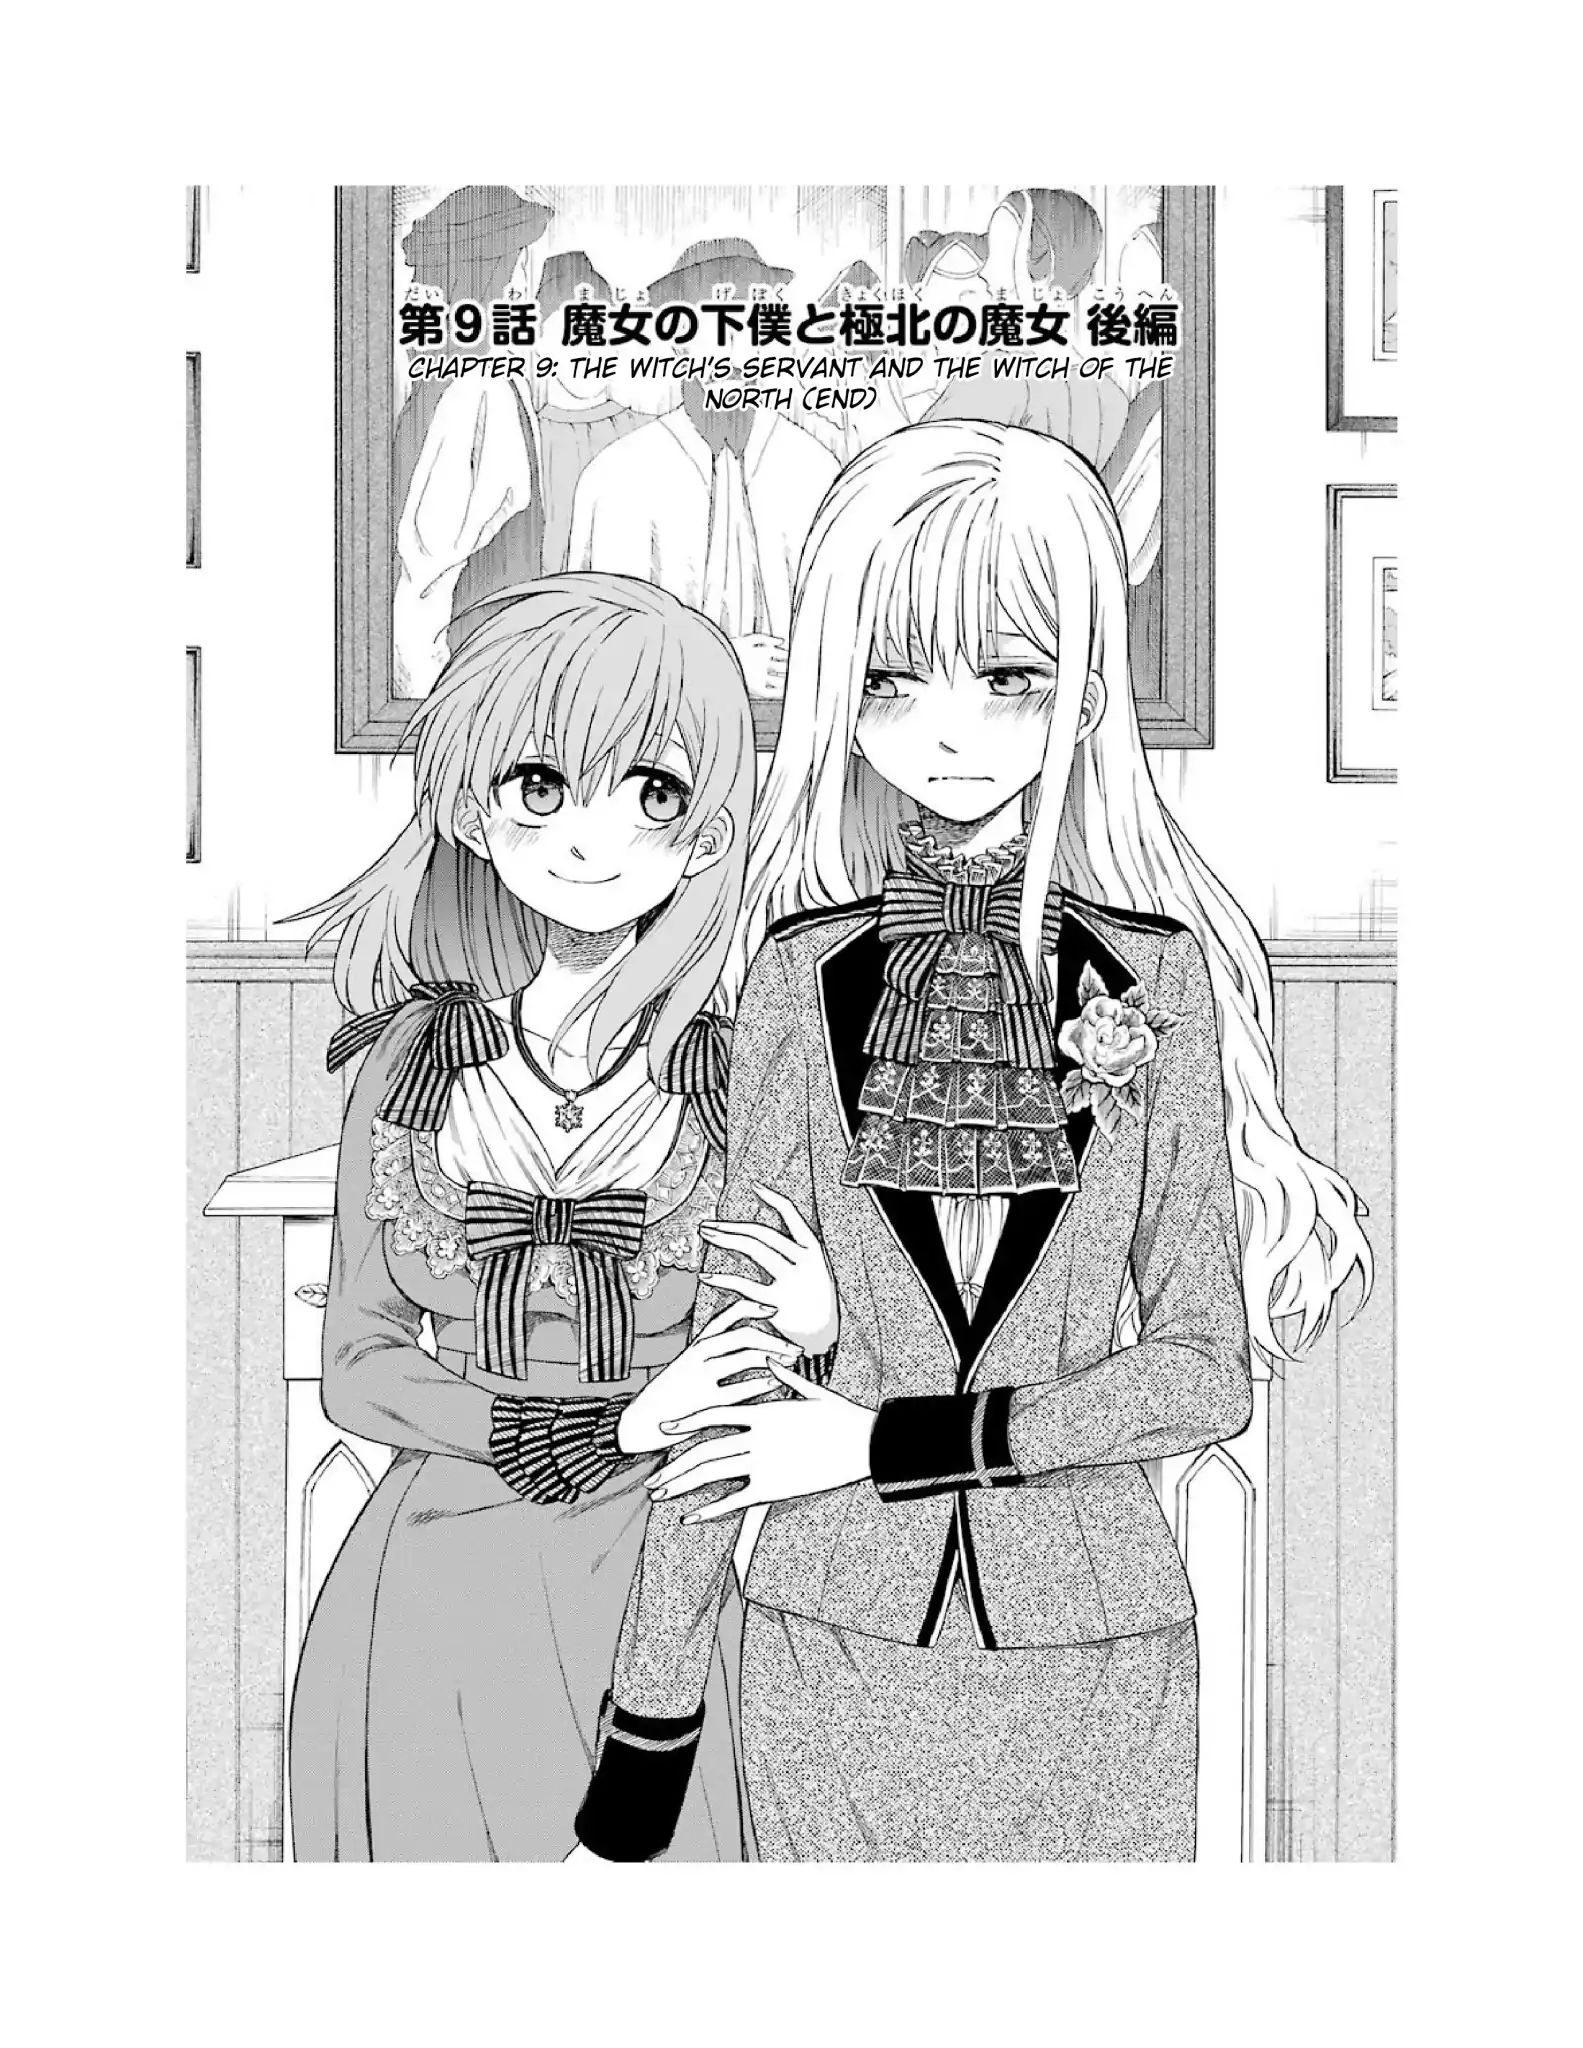 The Witch's Servant and The Demon Lords Horns Vol.2 Chapter 9: The Witch's Servant and The Witch of The North (End)